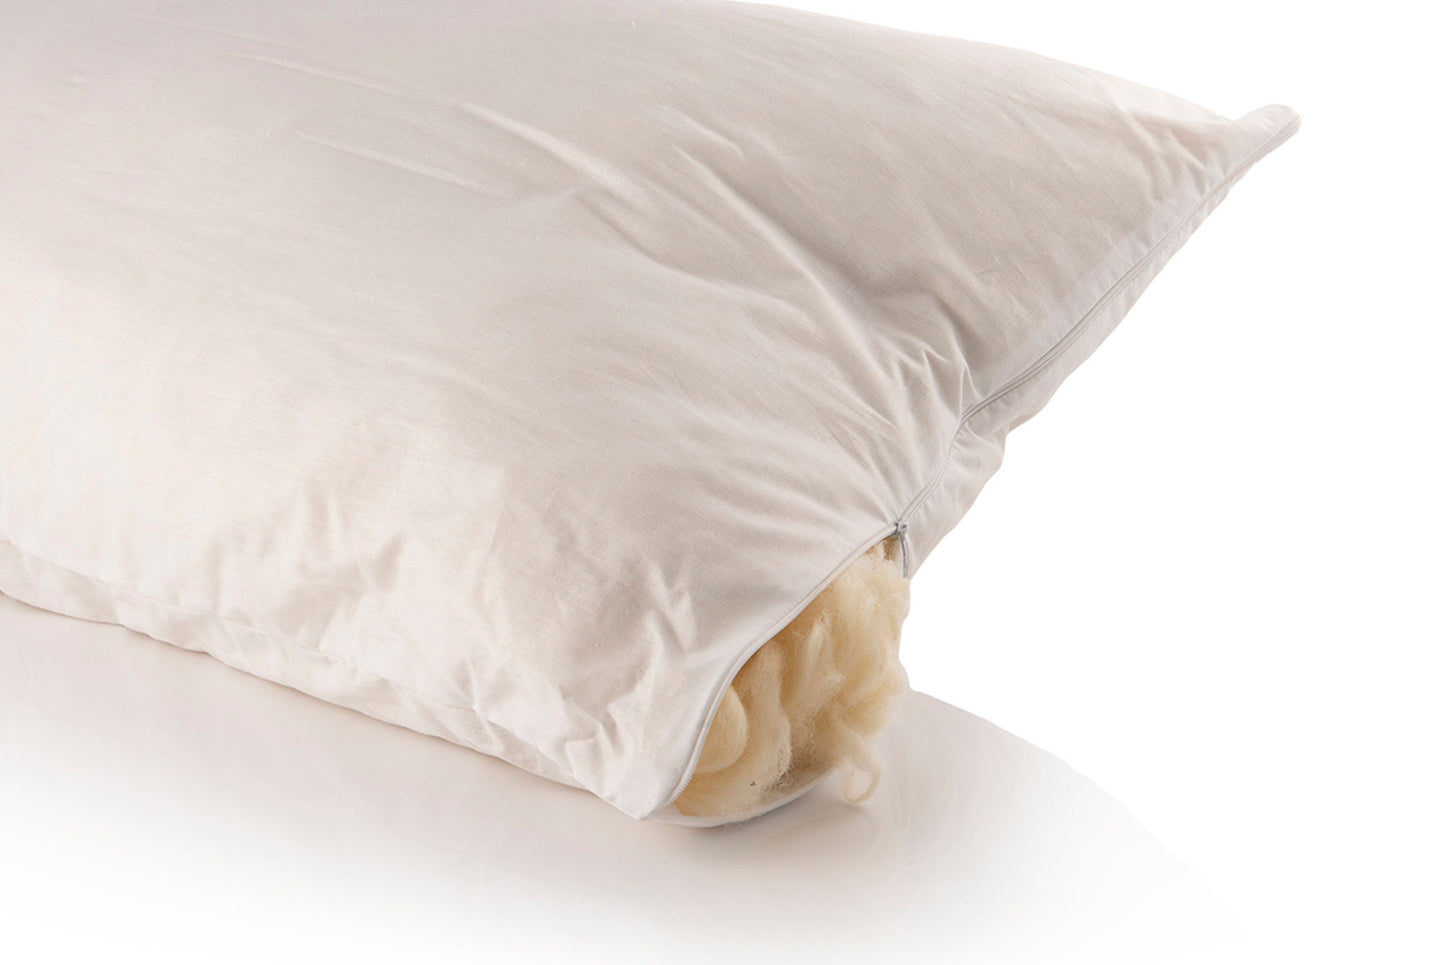 Non Chemicals Pillow - Natural wool